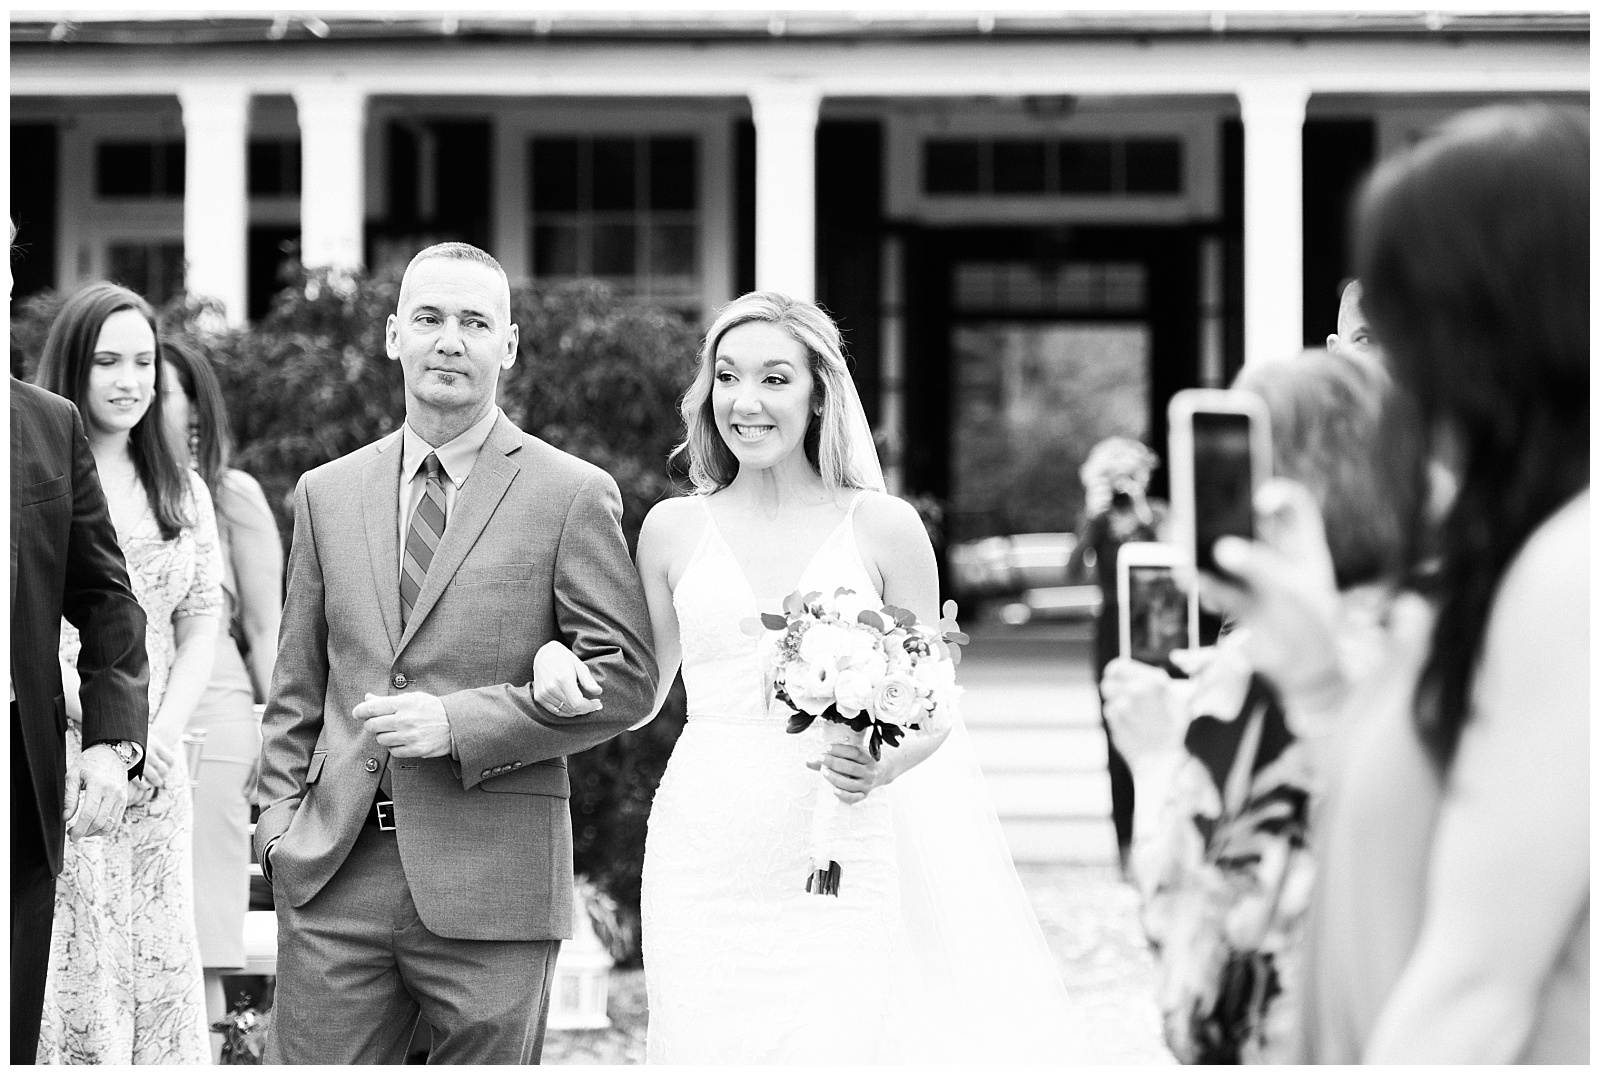 The bride and her dad walk together down the aisle during the ceremony.